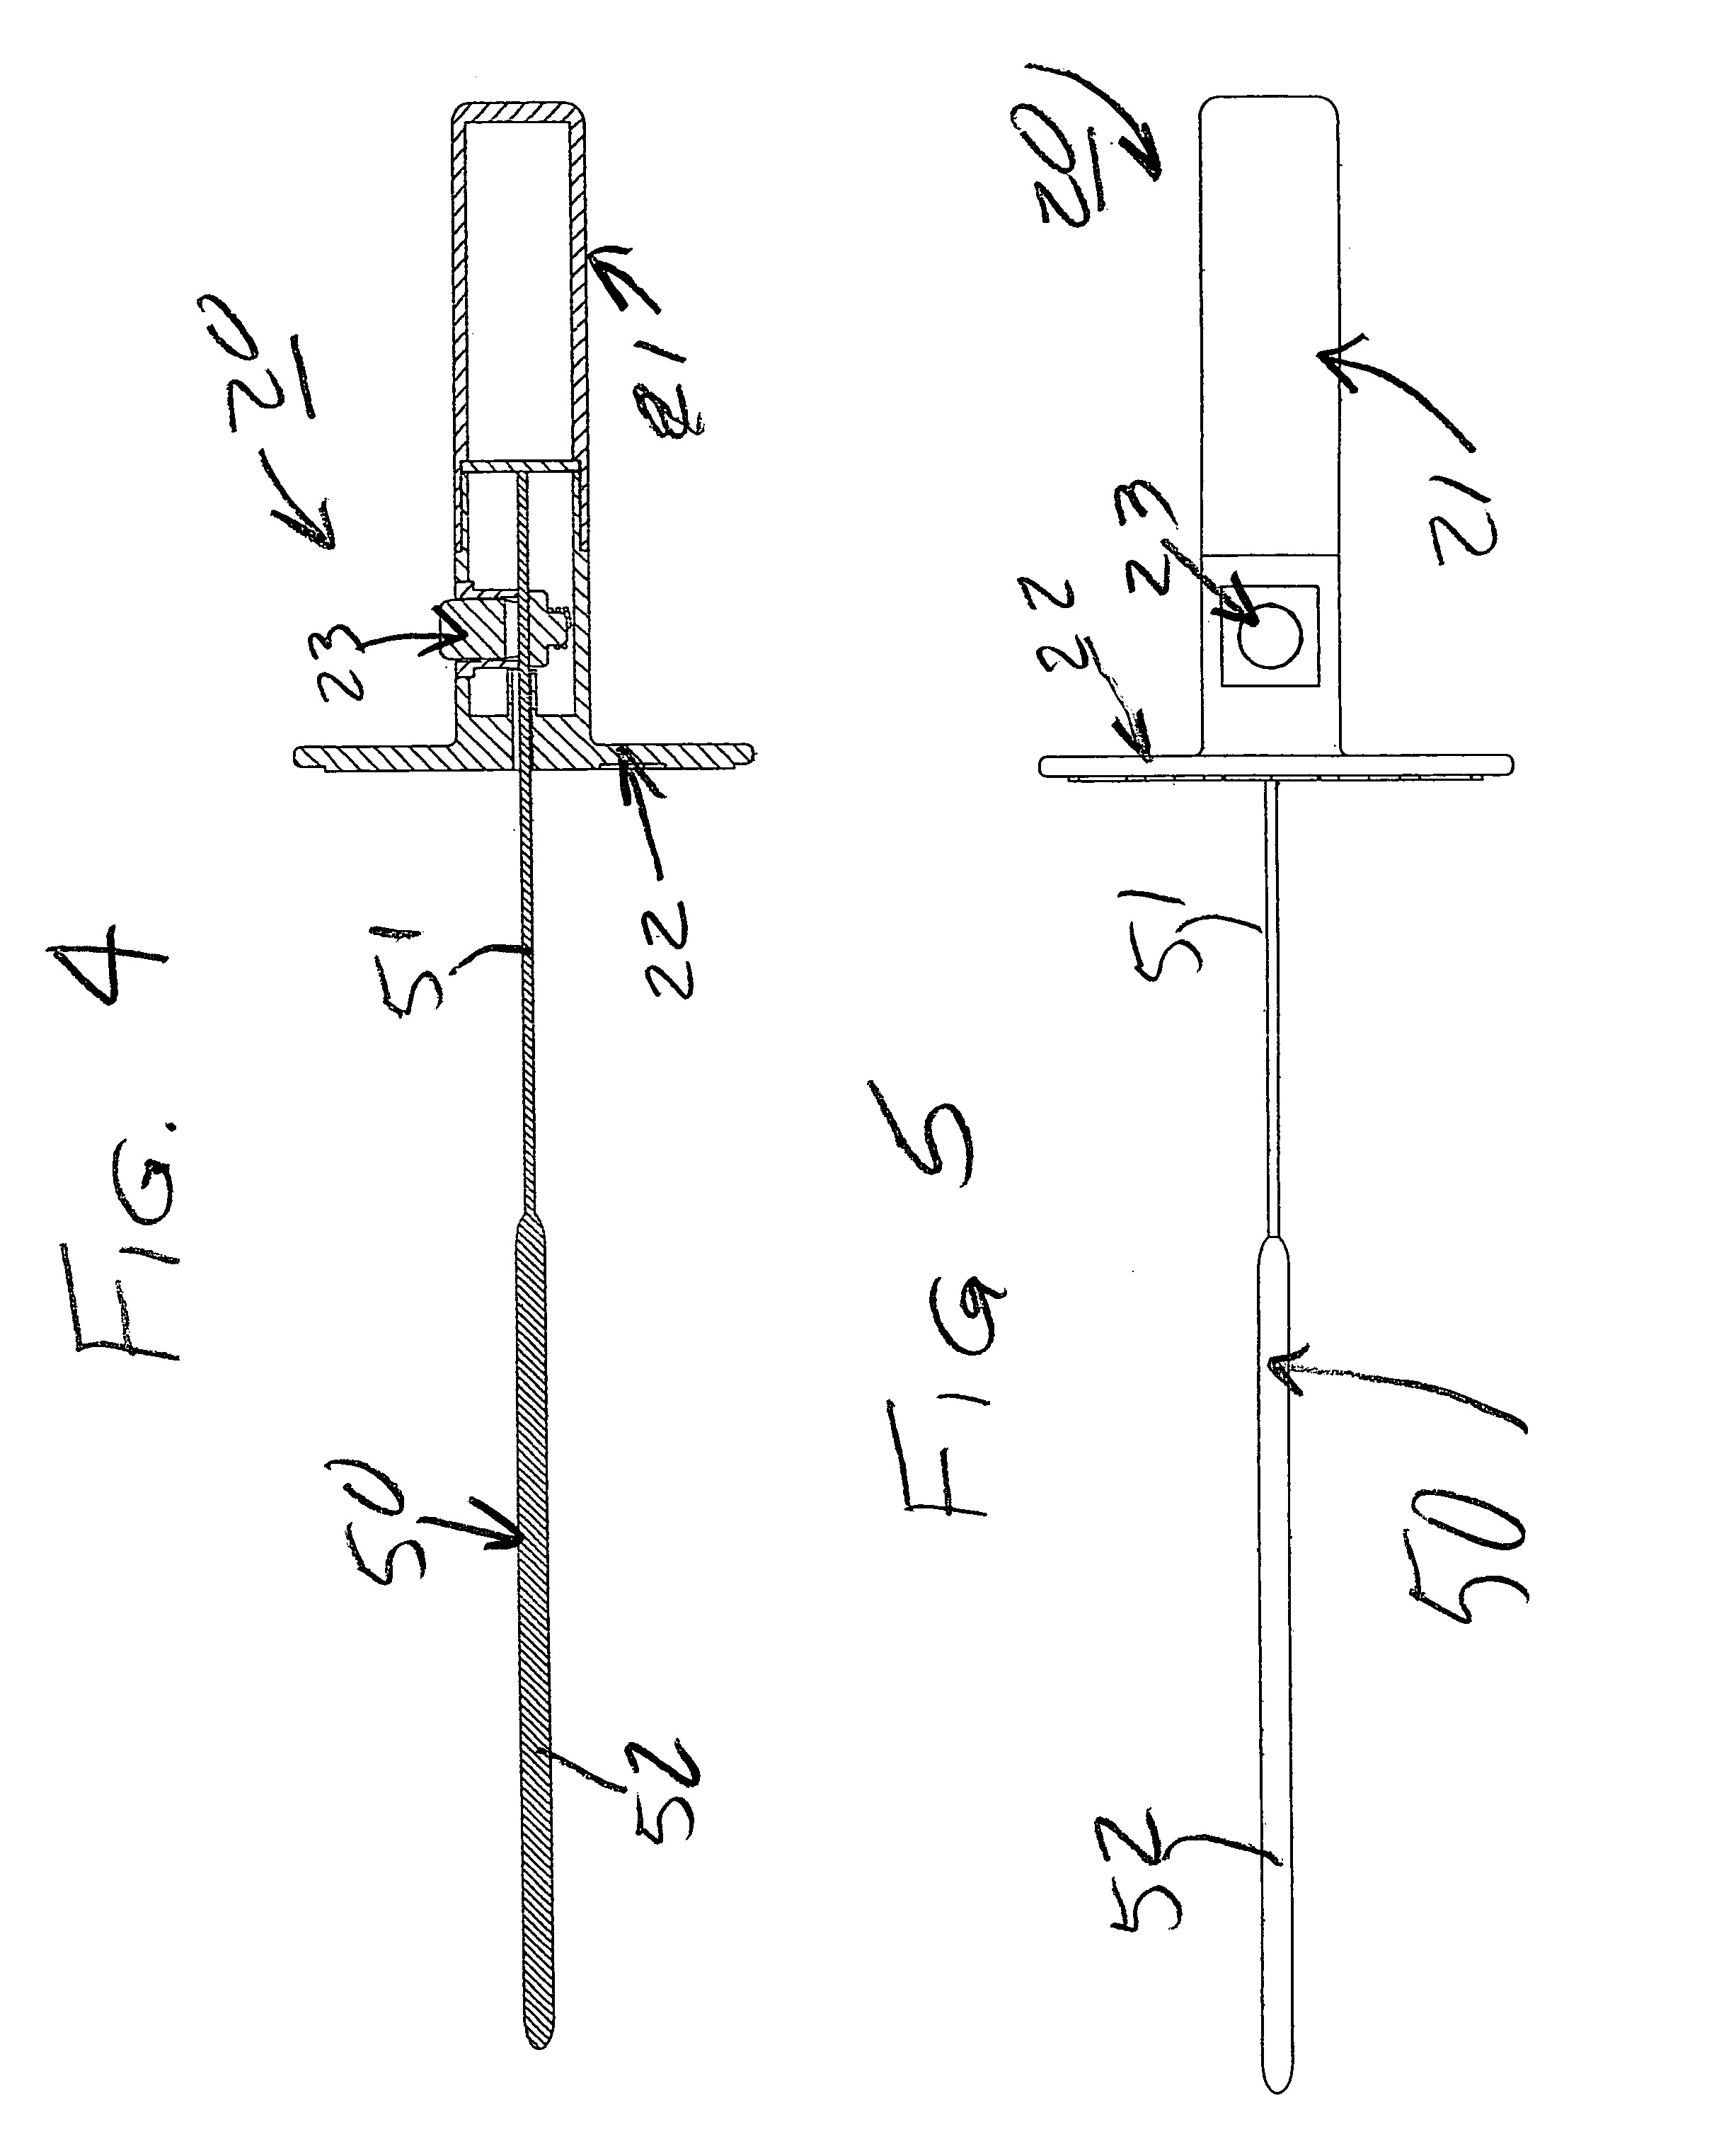 Reusable holding system for pyrotechnic, shaft bearing devices